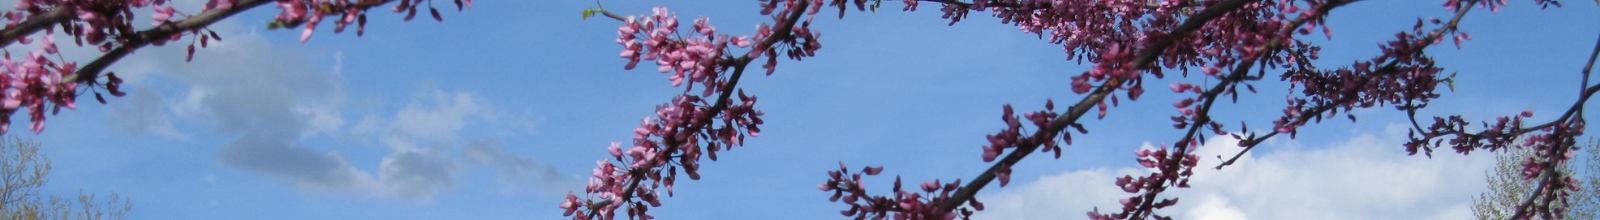 Branches of a small tree with small petals hang